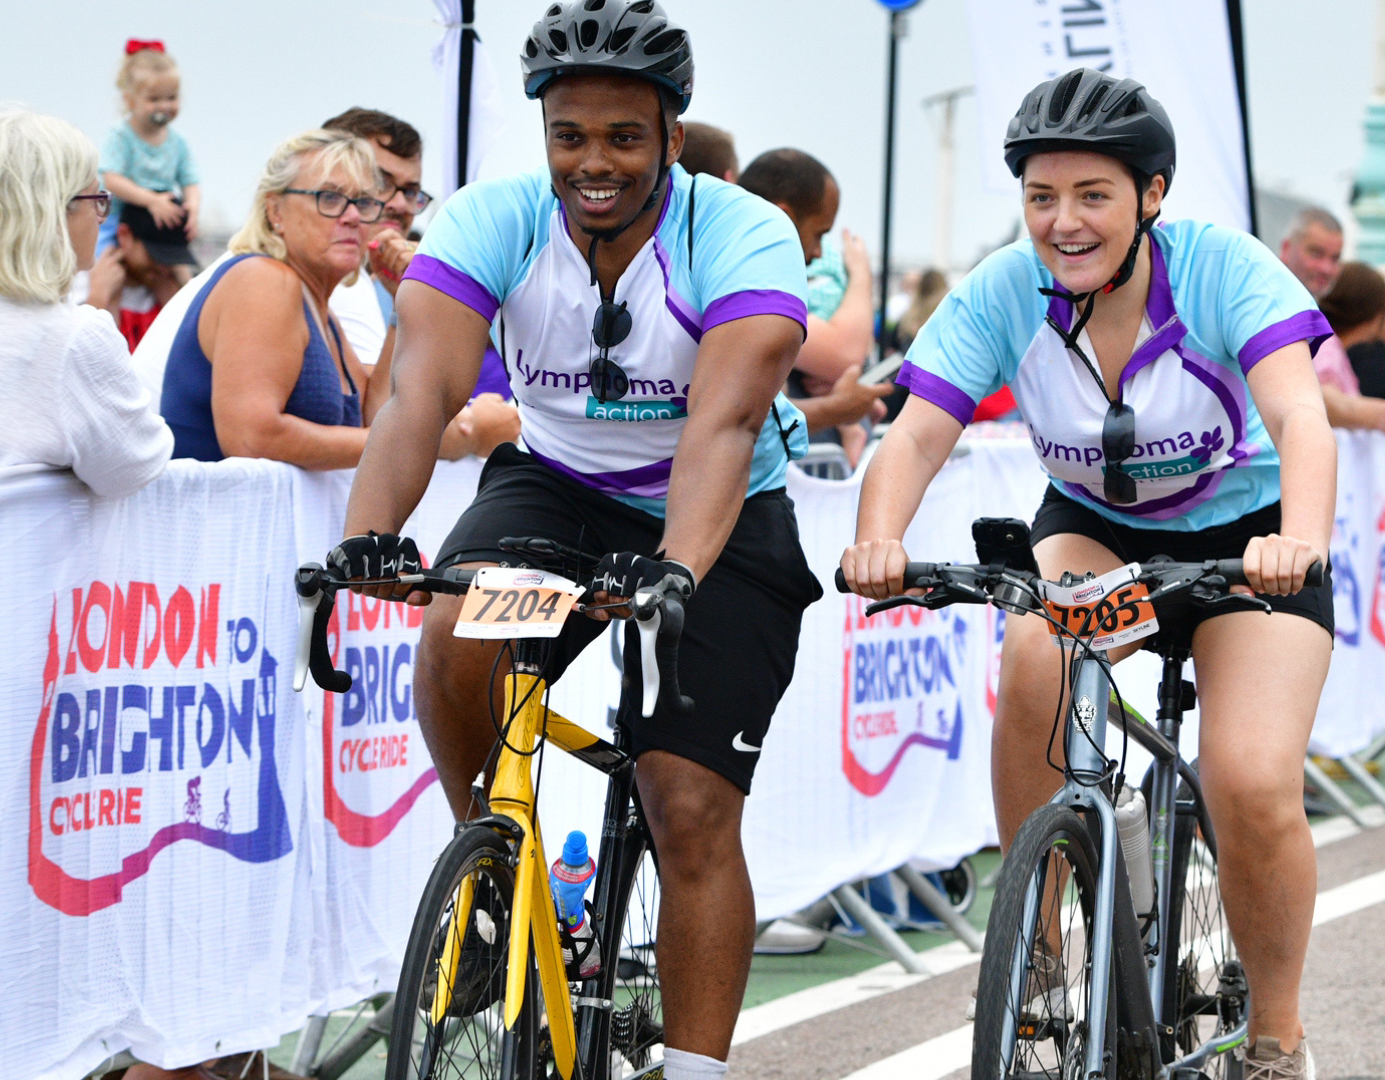 Two cyclists taking part in London to Brighton Cycle Ride